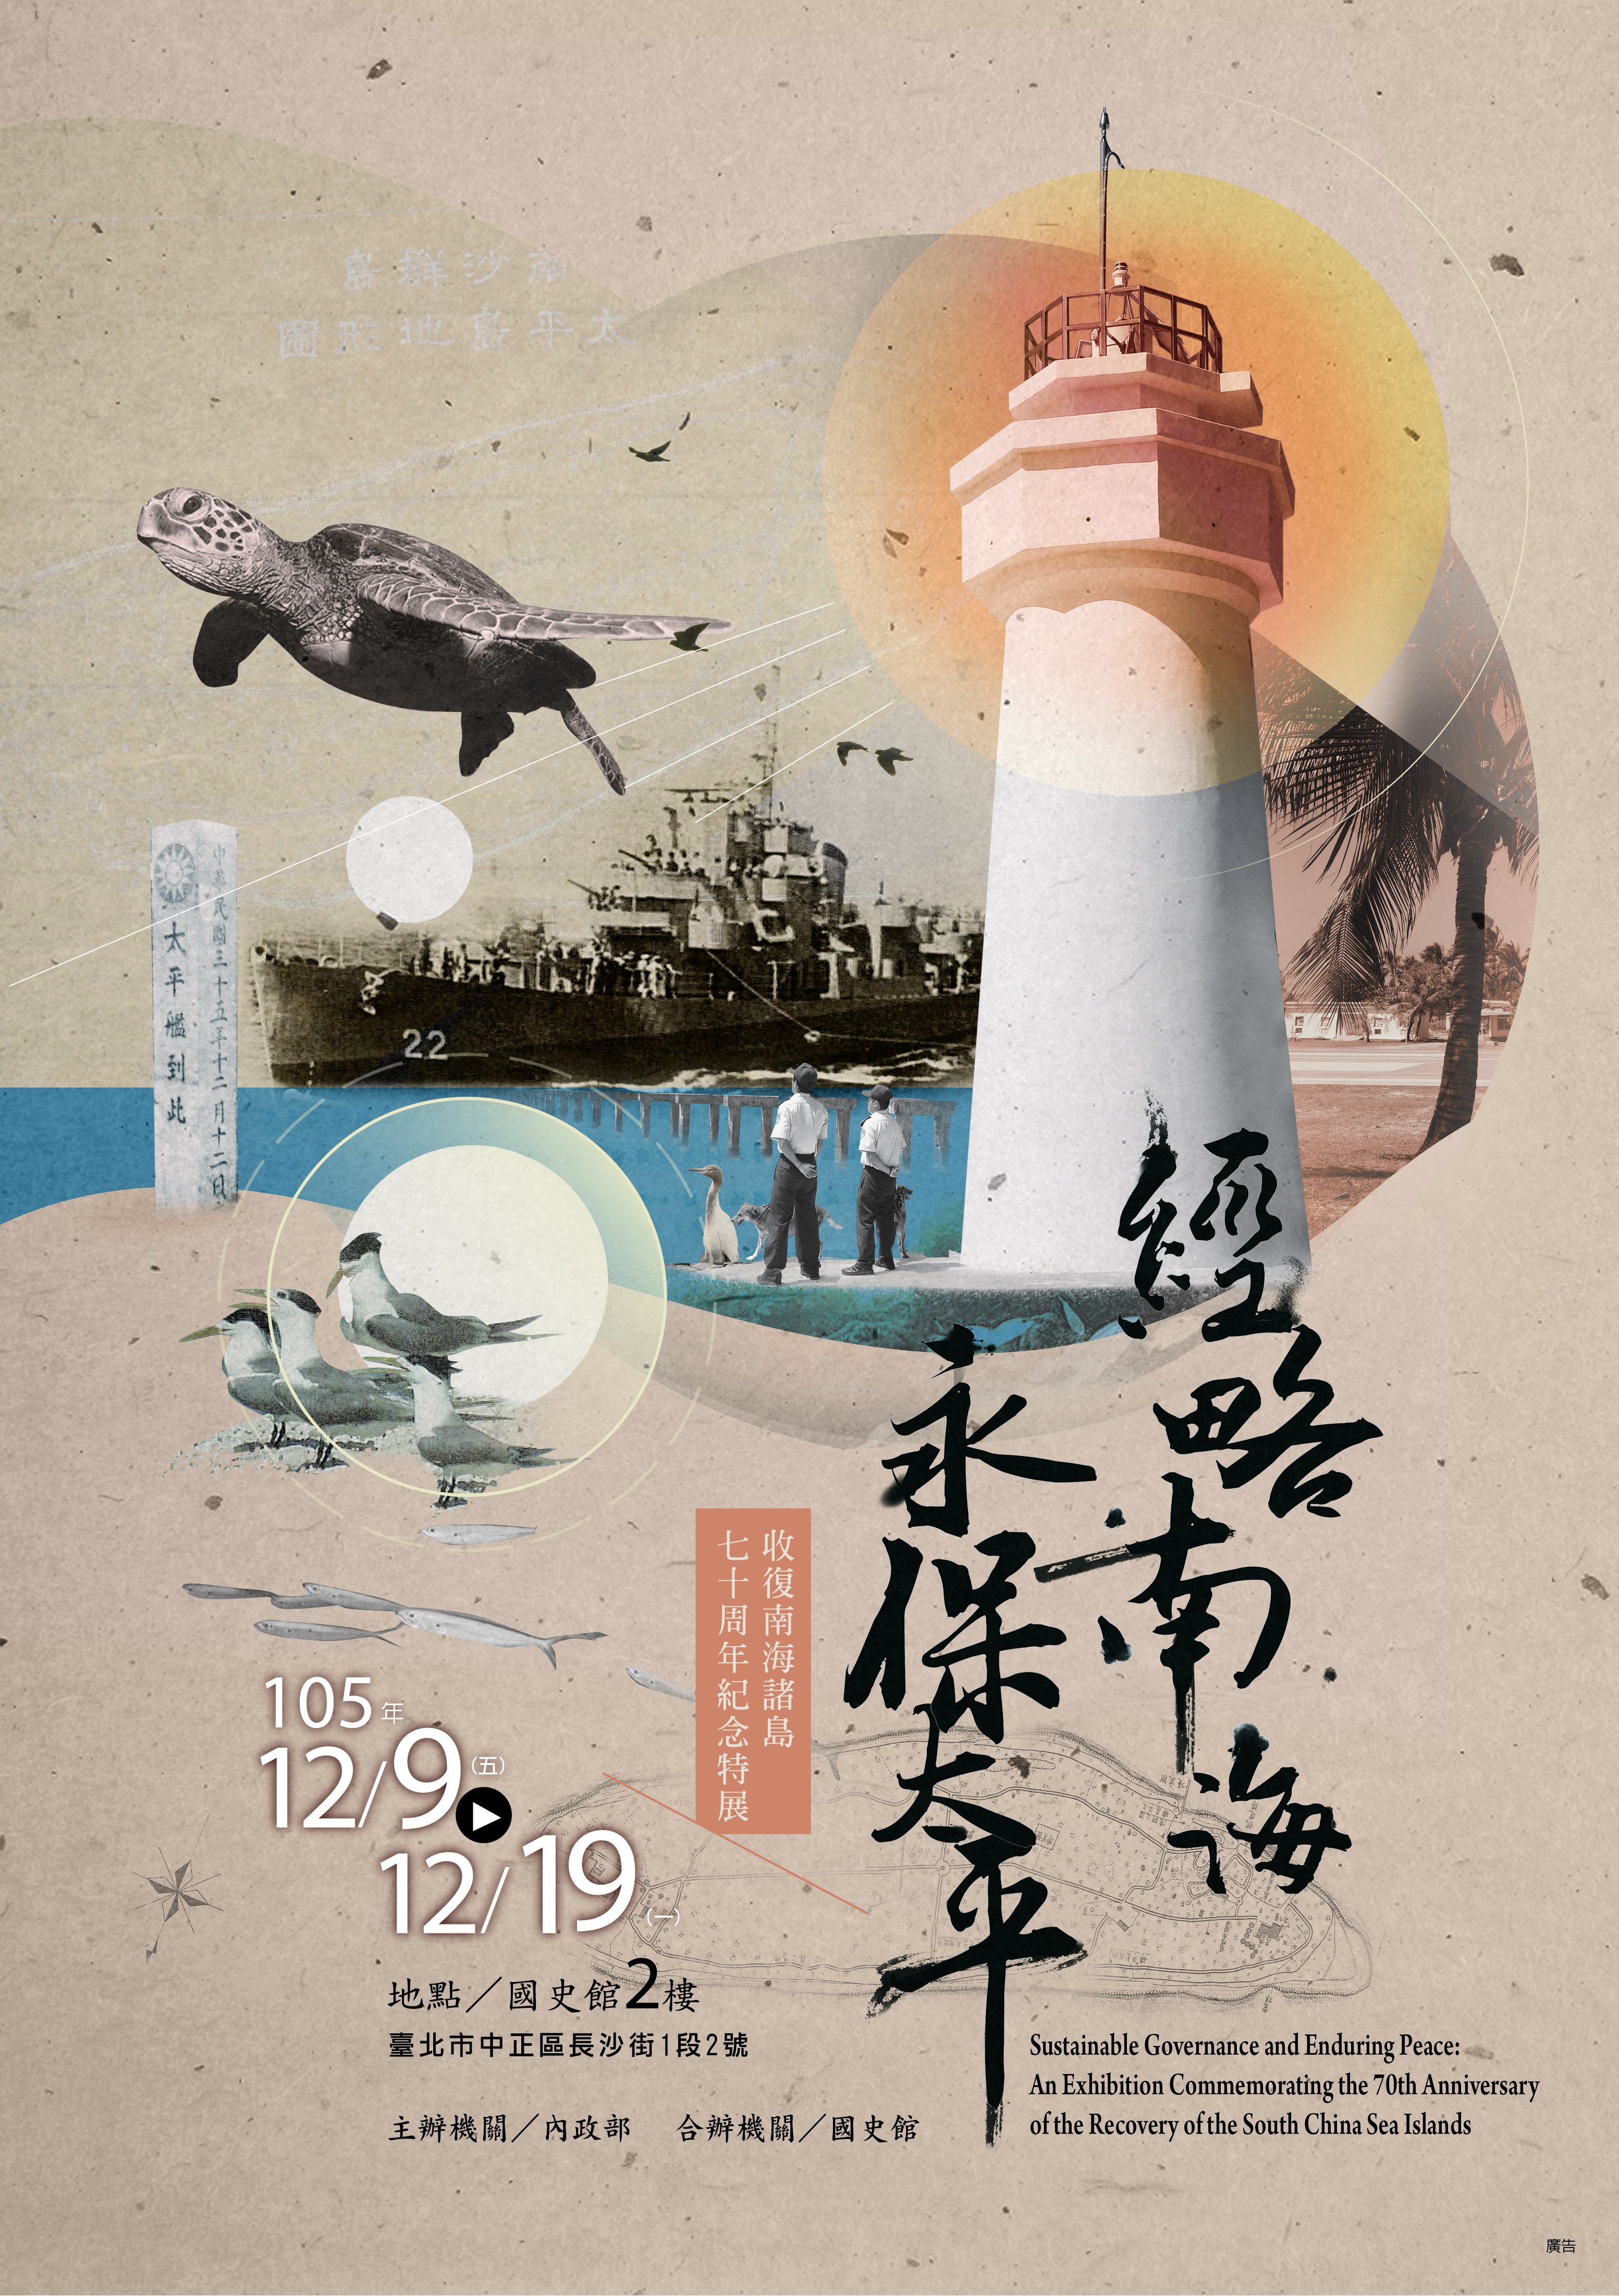 Sustainable Governance and Enduring Peace:An Exhibition Commemorating the 70th Anniversary of the Recovery of the South China Sea Islands opens December 9